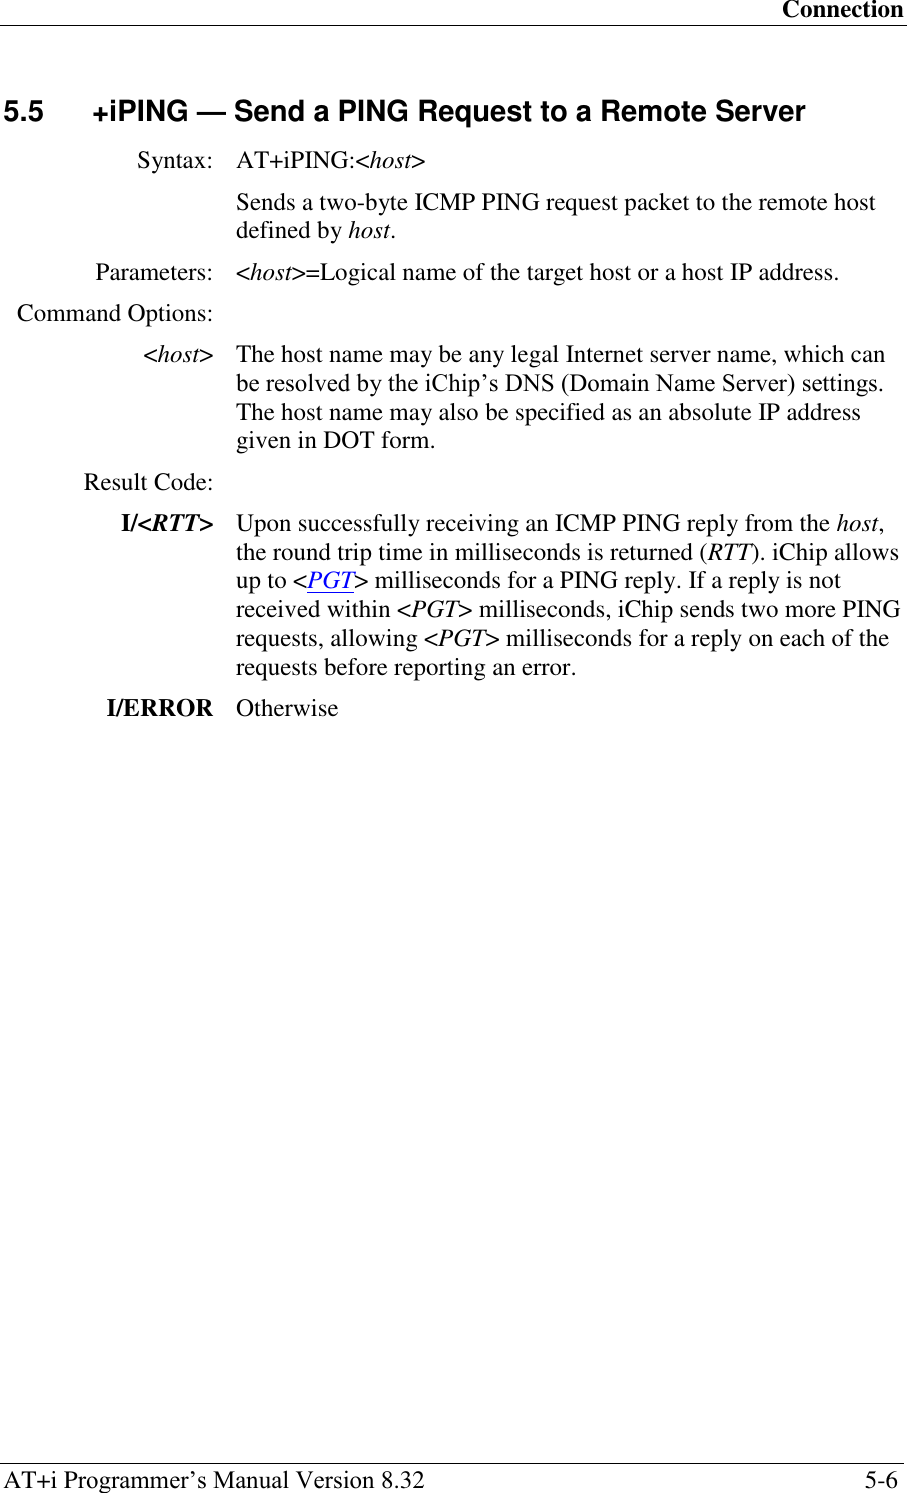 Connection AT+i Programmer‘s Manual Version 8.32  5-6 5.5  +iPING — Send a PING Request to a Remote Server  Syntax: AT+iPING:&lt;host&gt;  Sends a two-byte ICMP PING request packet to the remote host defined by host. Parameters: &lt;host&gt;=Logical name of the target host or a host IP address. Command Options:  &lt;host&gt; The host name may be any legal Internet server name, which can be resolved by the iChip‘s DNS (Domain Name Server) settings. The host name may also be specified as an absolute IP address given in DOT form. Result Code:  I/&lt;RTT&gt; Upon successfully receiving an ICMP PING reply from the host, the round trip time in milliseconds is returned (RTT). iChip allows up to &lt;PGT&gt; milliseconds for a PING reply. If a reply is not received within &lt;PGT&gt; milliseconds, iChip sends two more PING requests, allowing &lt;PGT&gt; milliseconds for a reply on each of the requests before reporting an error. I/ERROR Otherwise   